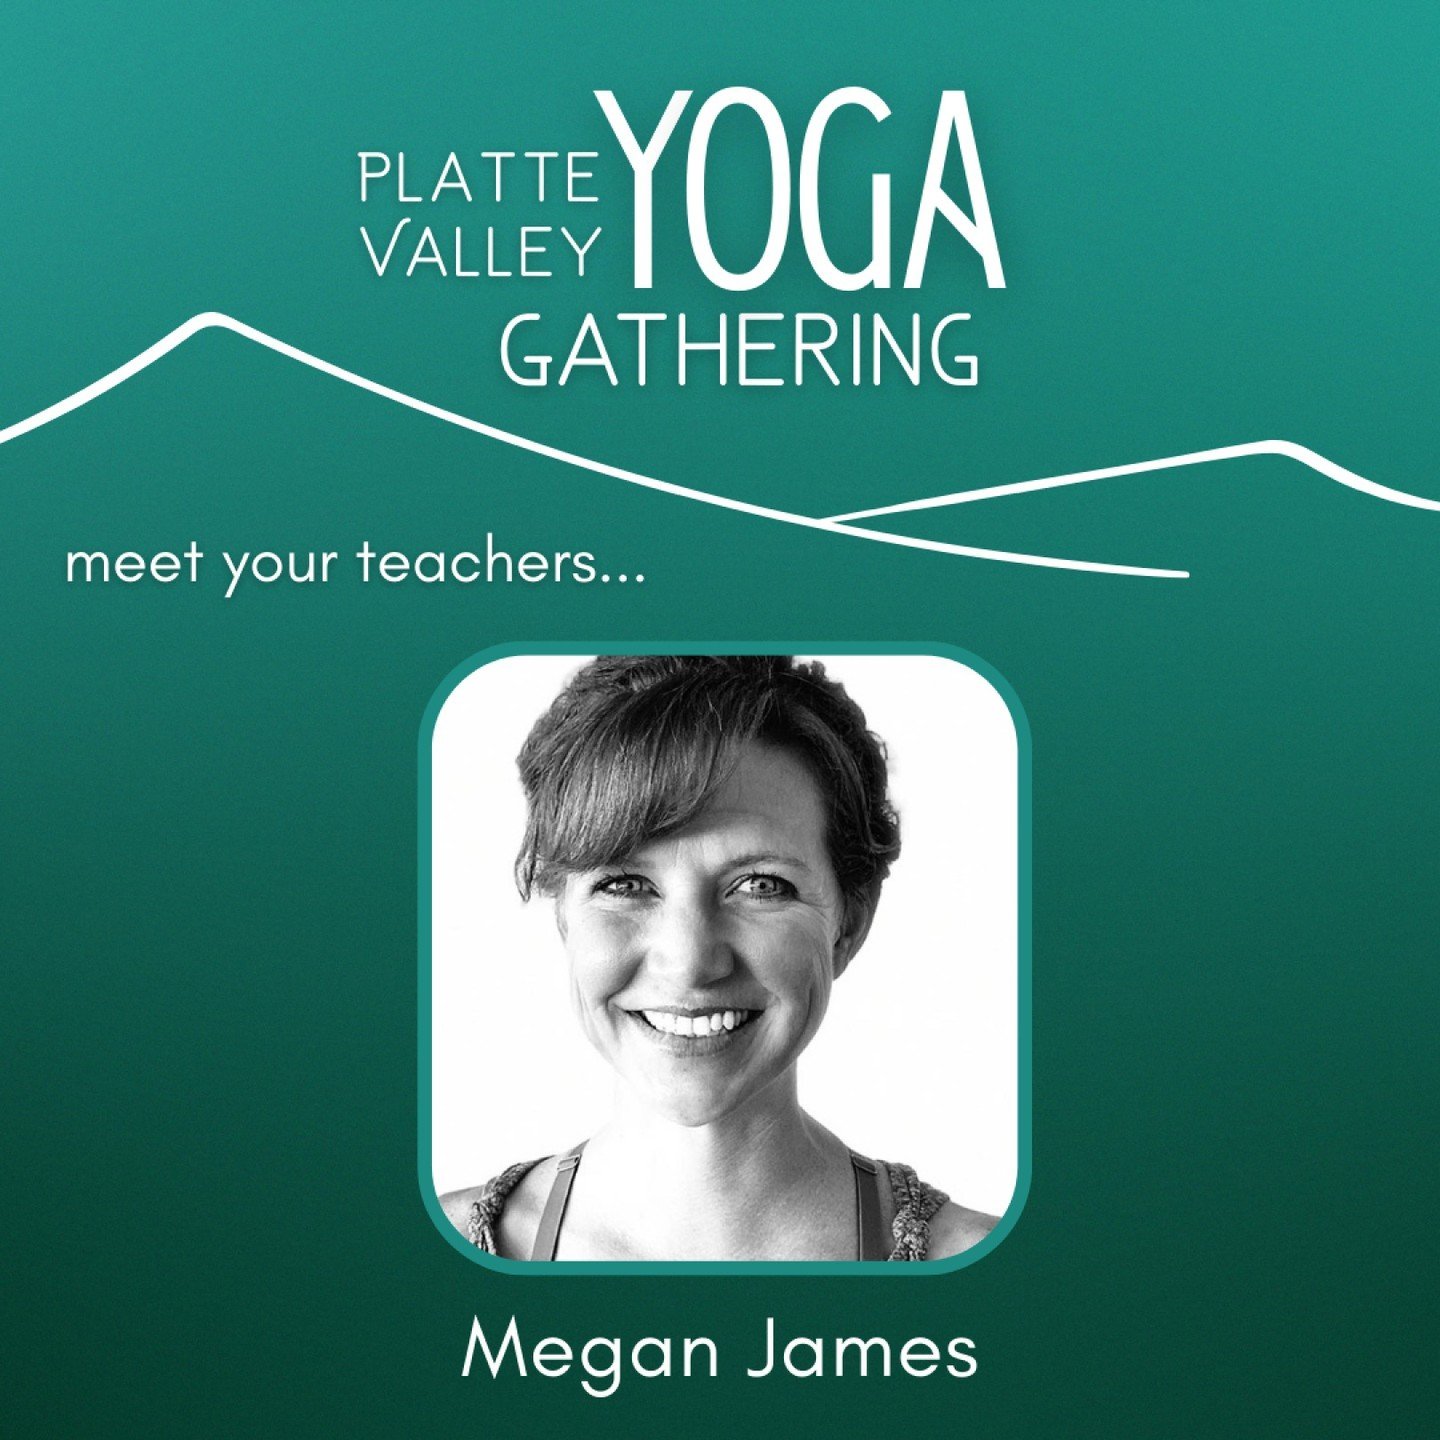 Meet your Platte Valley Yoga Teachers!

Megan James - 200 RYT

&quot;My name is Megan James, I&rsquo;m a Regional Manager for Union, a century old communications company. I&rsquo;m a wife to Creed James, a Realtor and owner of James Land Co. Collecti